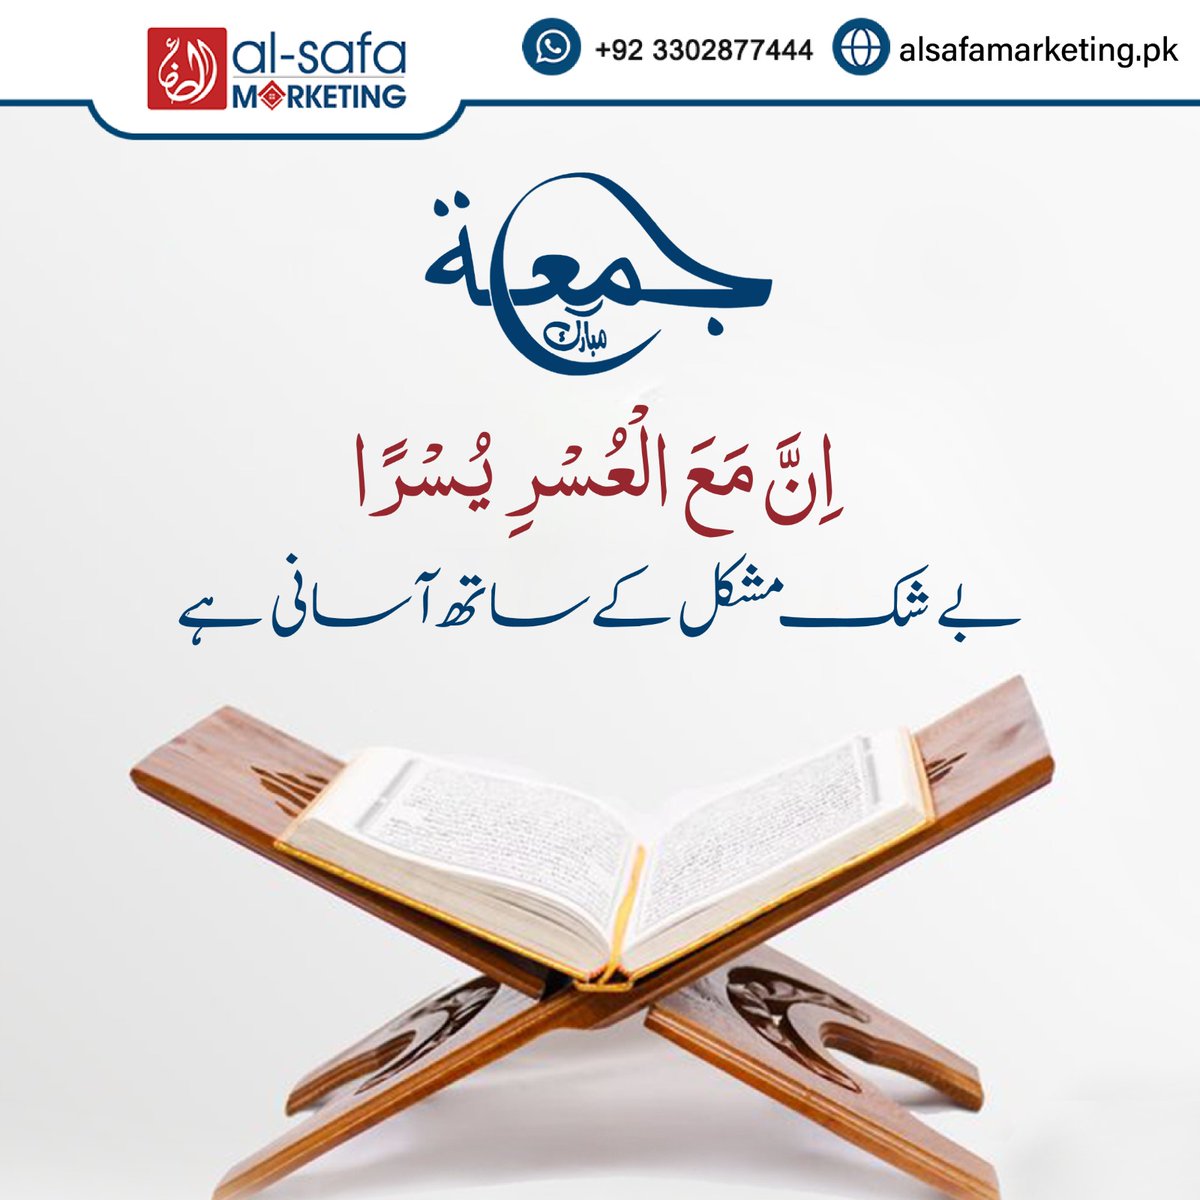 𝐉𝐮𝐦𝐦𝐚𝐡 𝐌𝐮𝐛𝐚𝐫𝐚𝐤! Indeed, with difficulty comes ease. Trust in Allah's plan, and may your Friday be blessed with peace and joy. #alSafa #alsafamarketingpk #FridayBlessings #BlessedFridayToAll #SeekingEaseThroughFaith #JummahMubarak